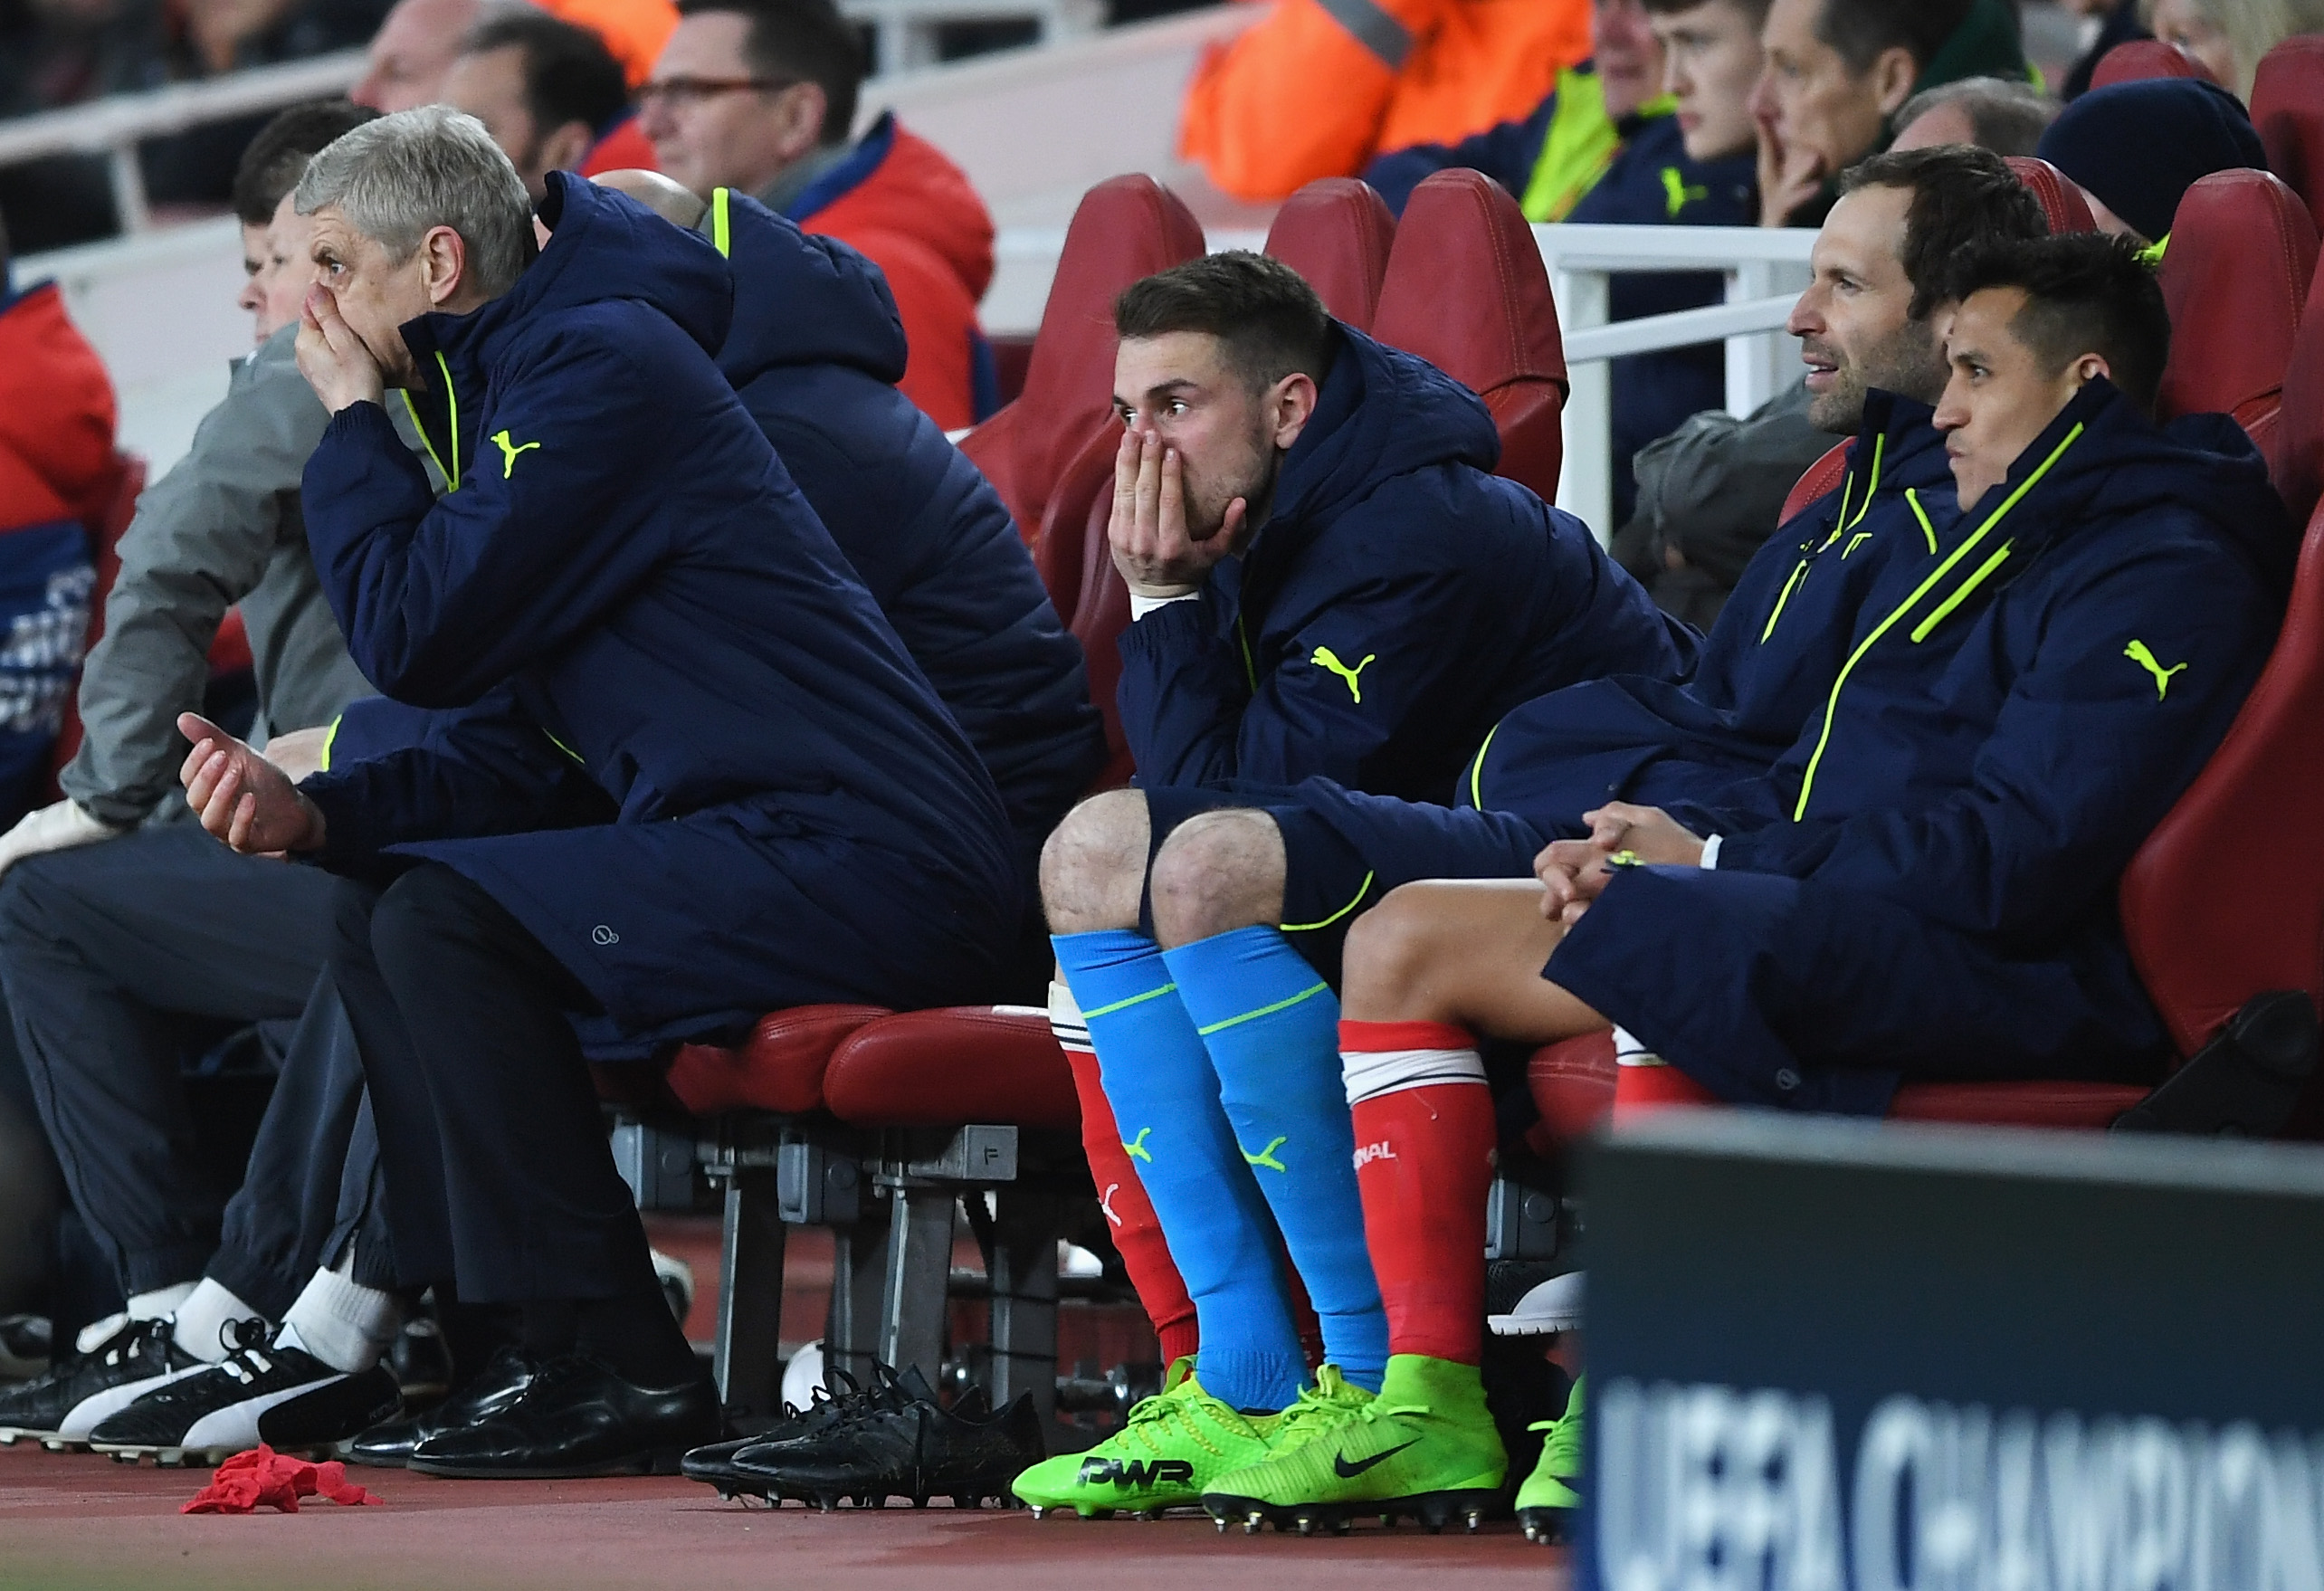 LONDON, ENGLAND - MARCH 07:  (L-R) Arsene Wenger, Manager of Arsenal, Aaron Ramsey, Petr Cech and Alexis Sanchez of Arsenal look dejected on the bench during the UEFA Champions League Round of 16 second leg match between Arsenal FC and FC Bayern Muenchen at Emirates Stadium on March 7, 2017 in London, United Kingdom.  (Photo by Shaun Botterill/Getty Images)